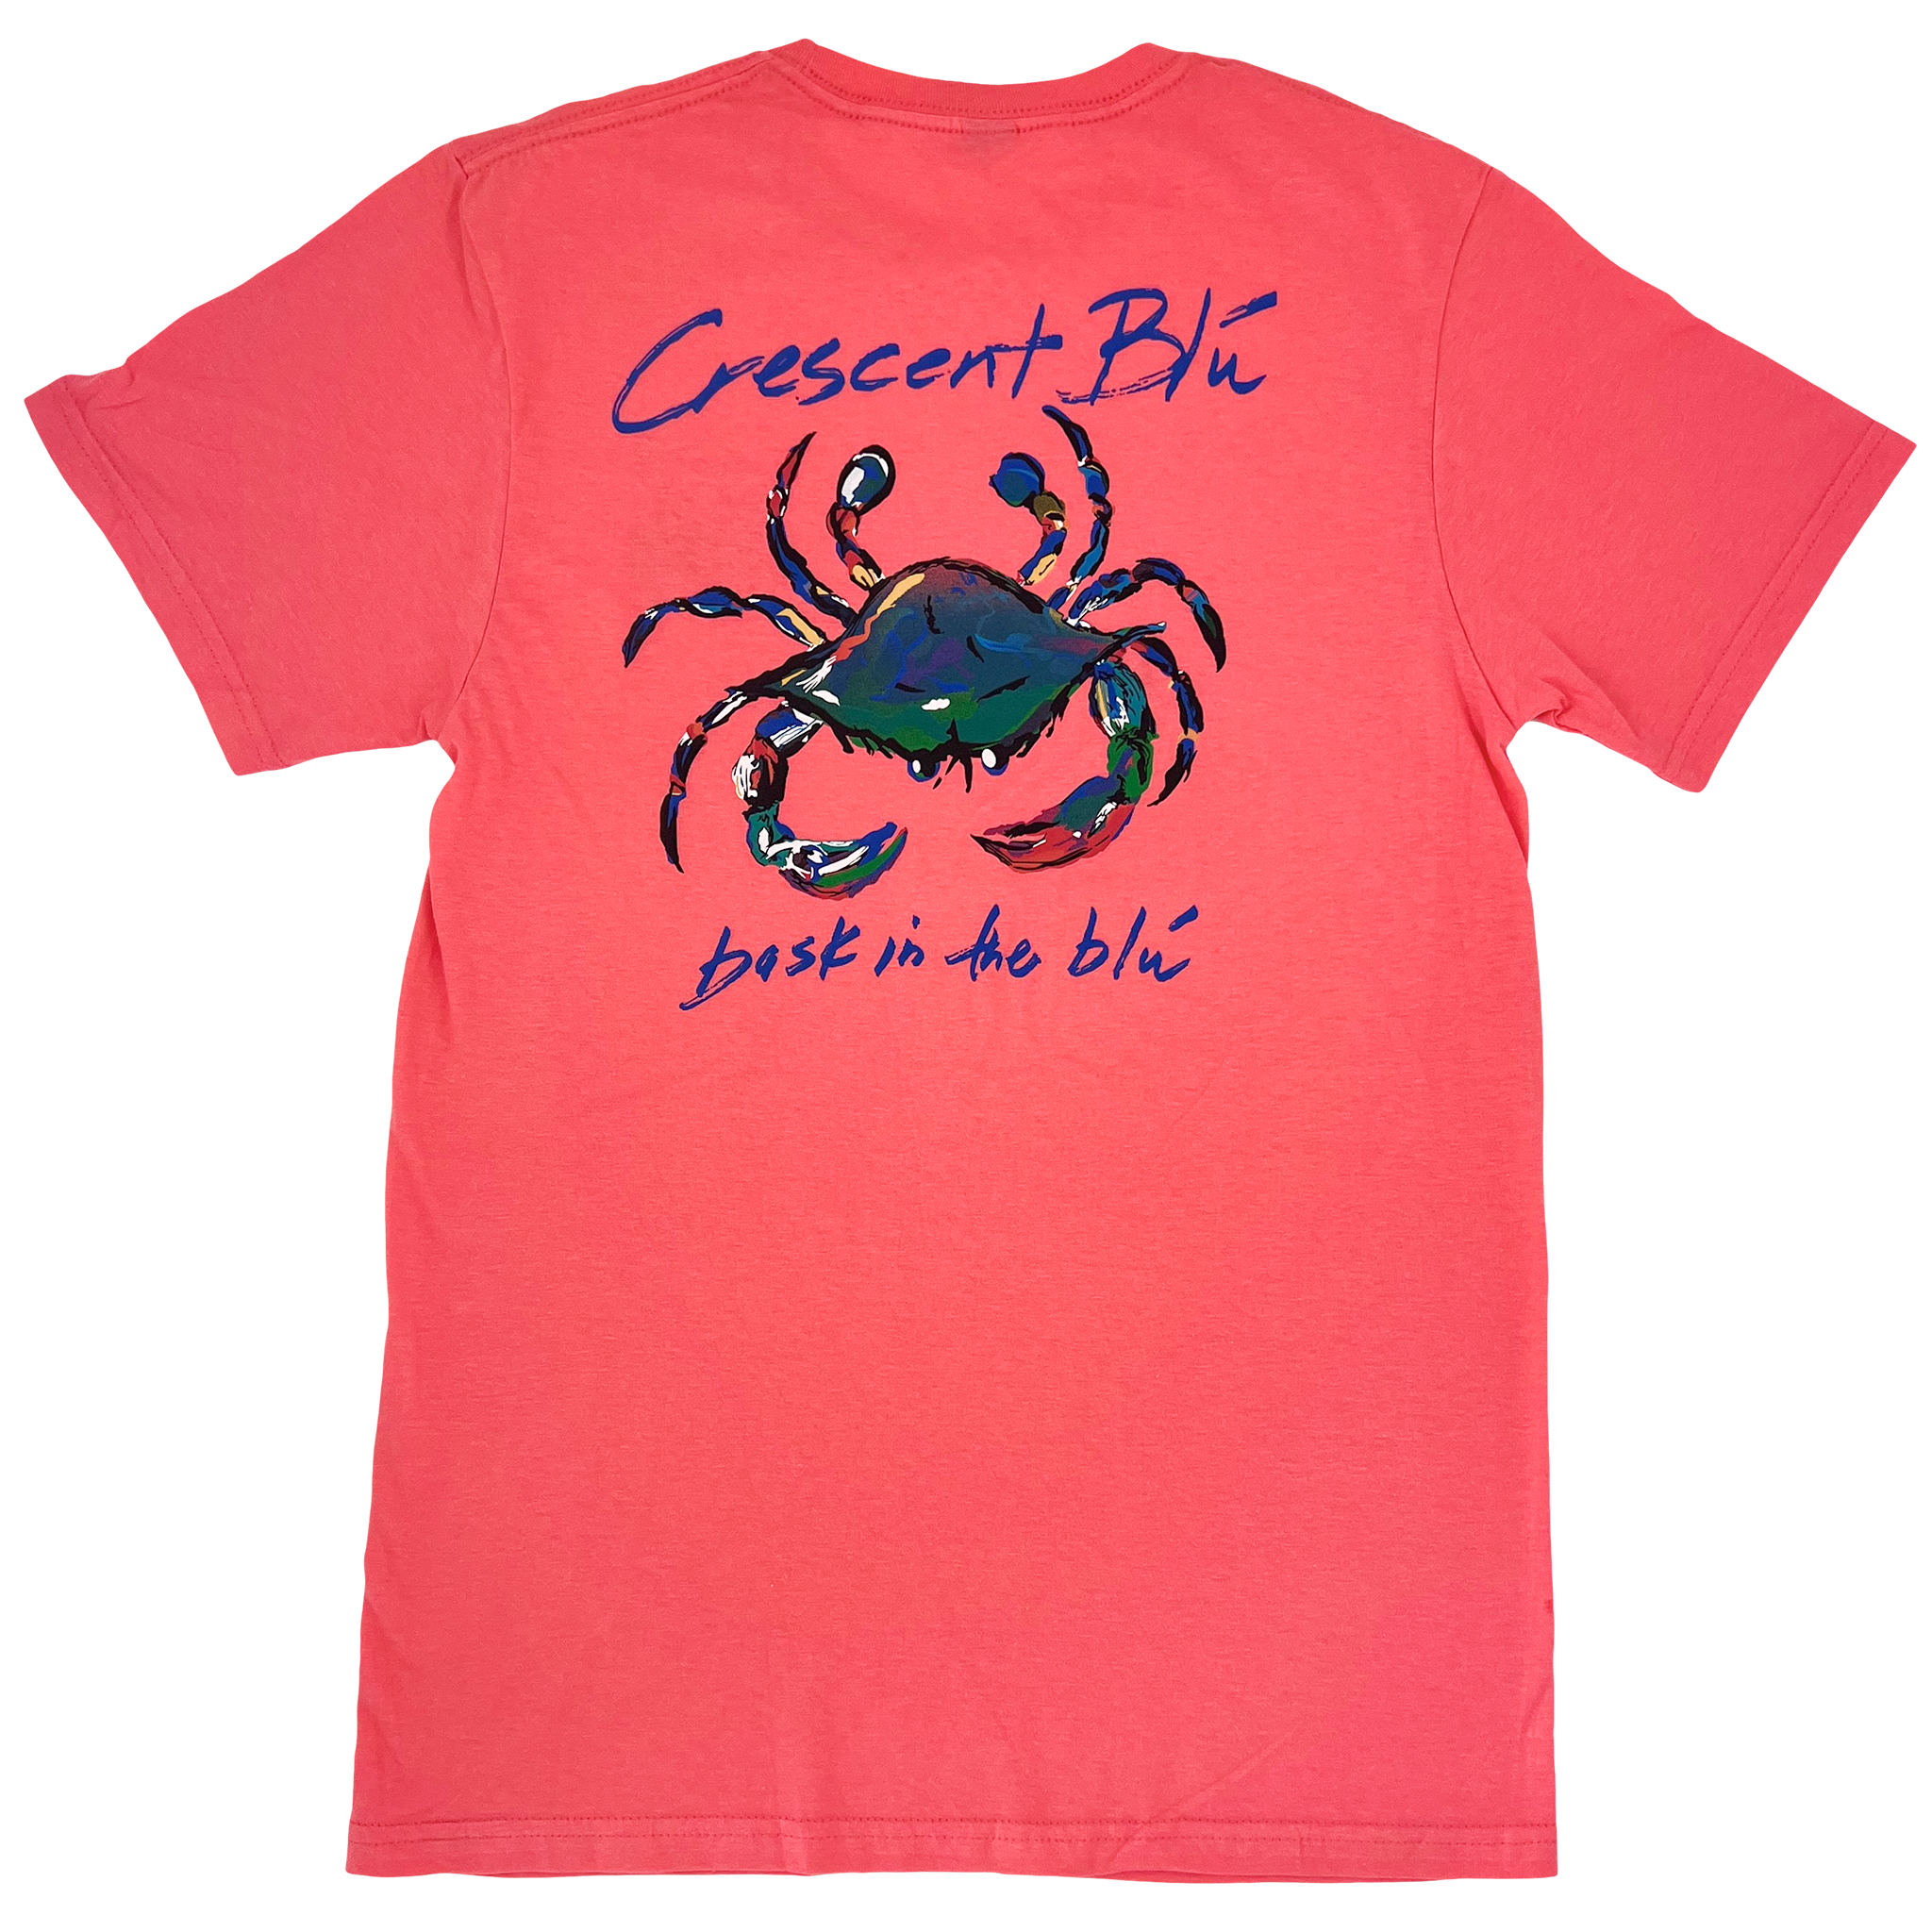 View of back of coral silk colored adult short sleeve t-shirt with large multi-colored Signature crab logo shown.